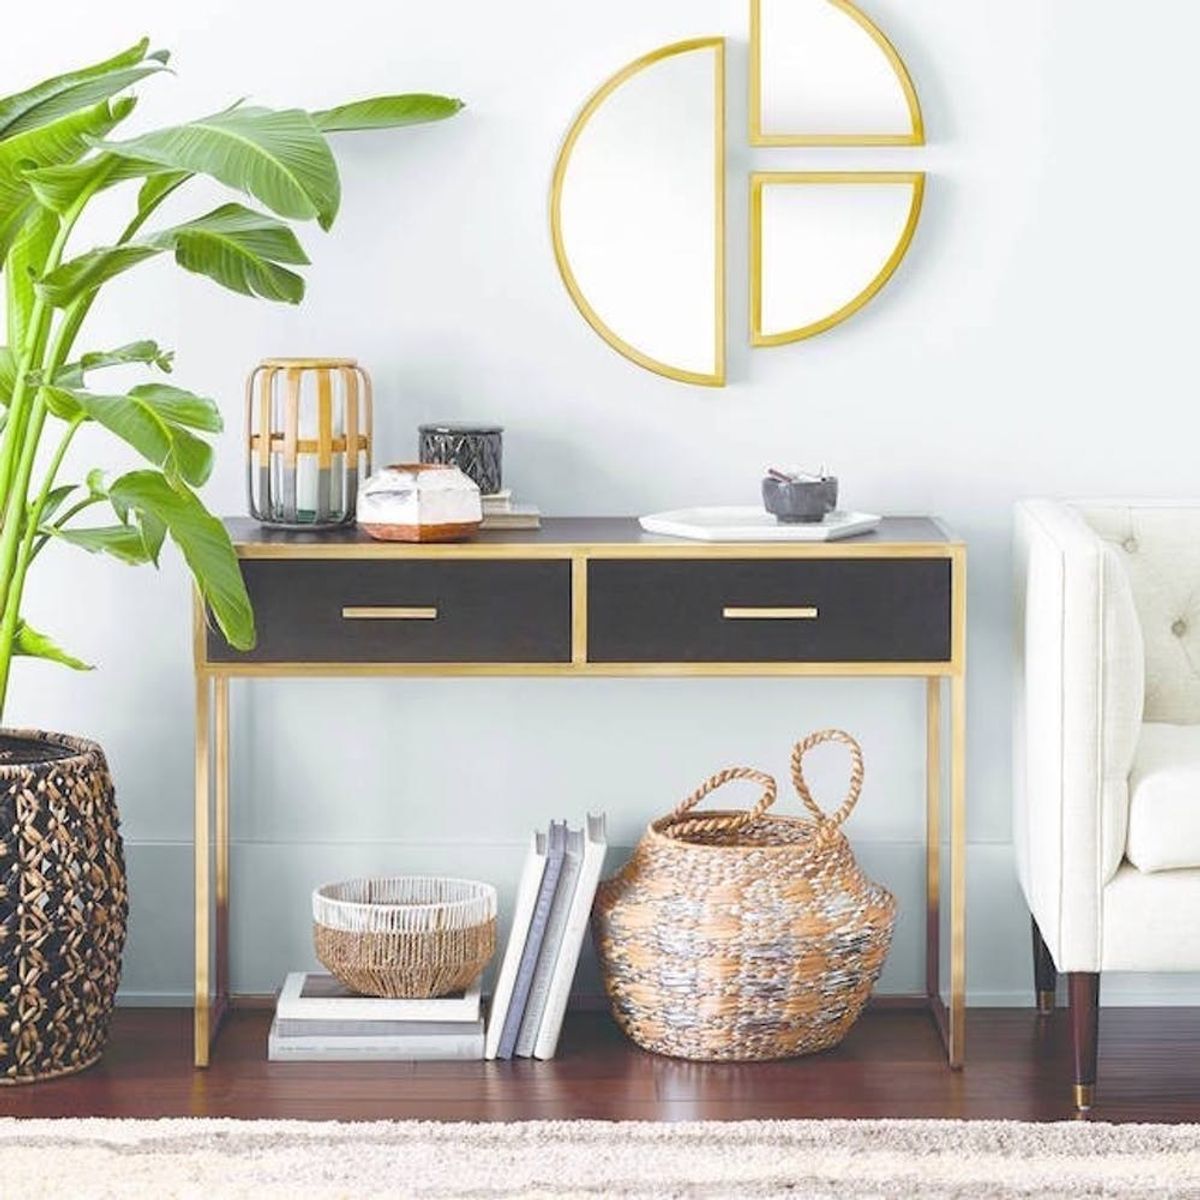 Nate Berkus + Target’s New Nature-Inspired Collection Is Perfect for a New Year Refresh